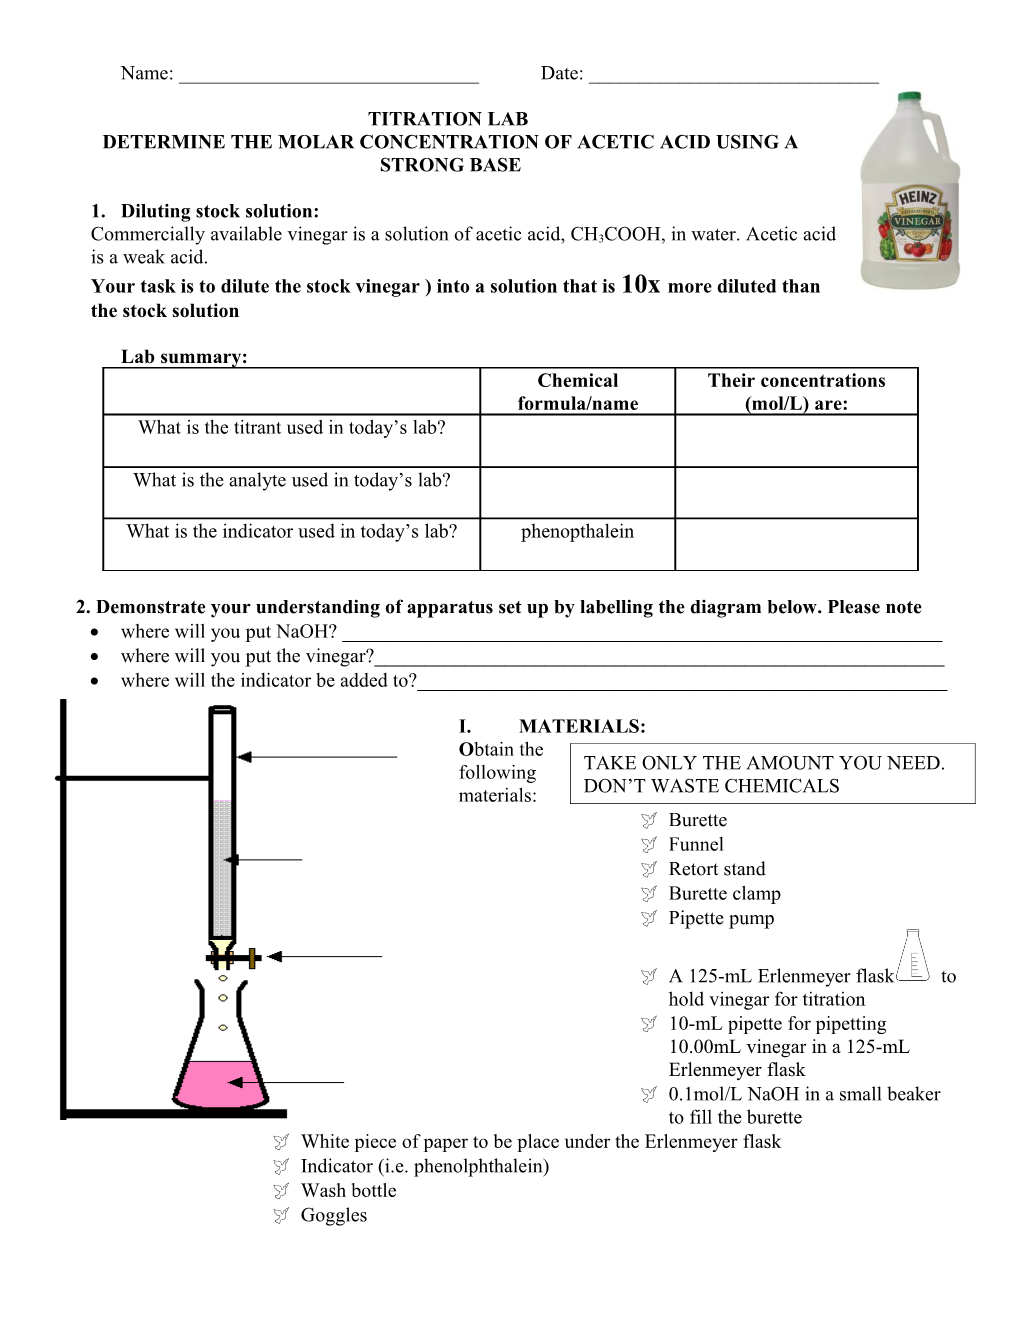 Determine the Molar Concentration of Acetic Acid Using a Strong Base